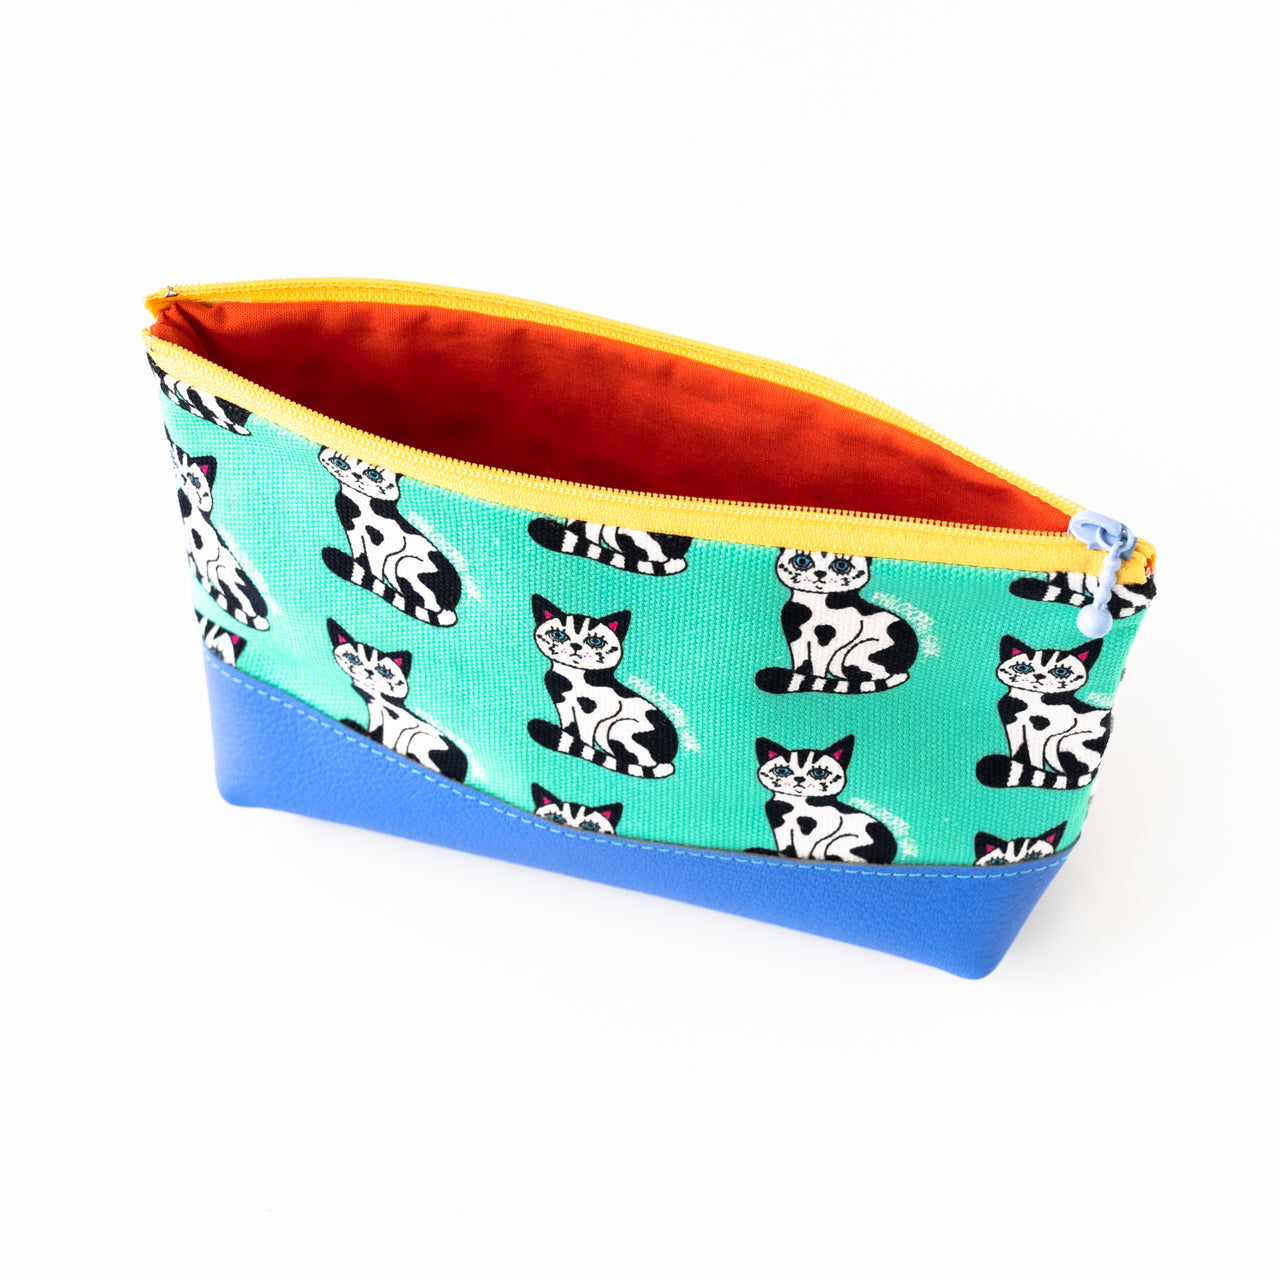 SINK. x Philosophii collaboration Ushineko pouch (with gusset)